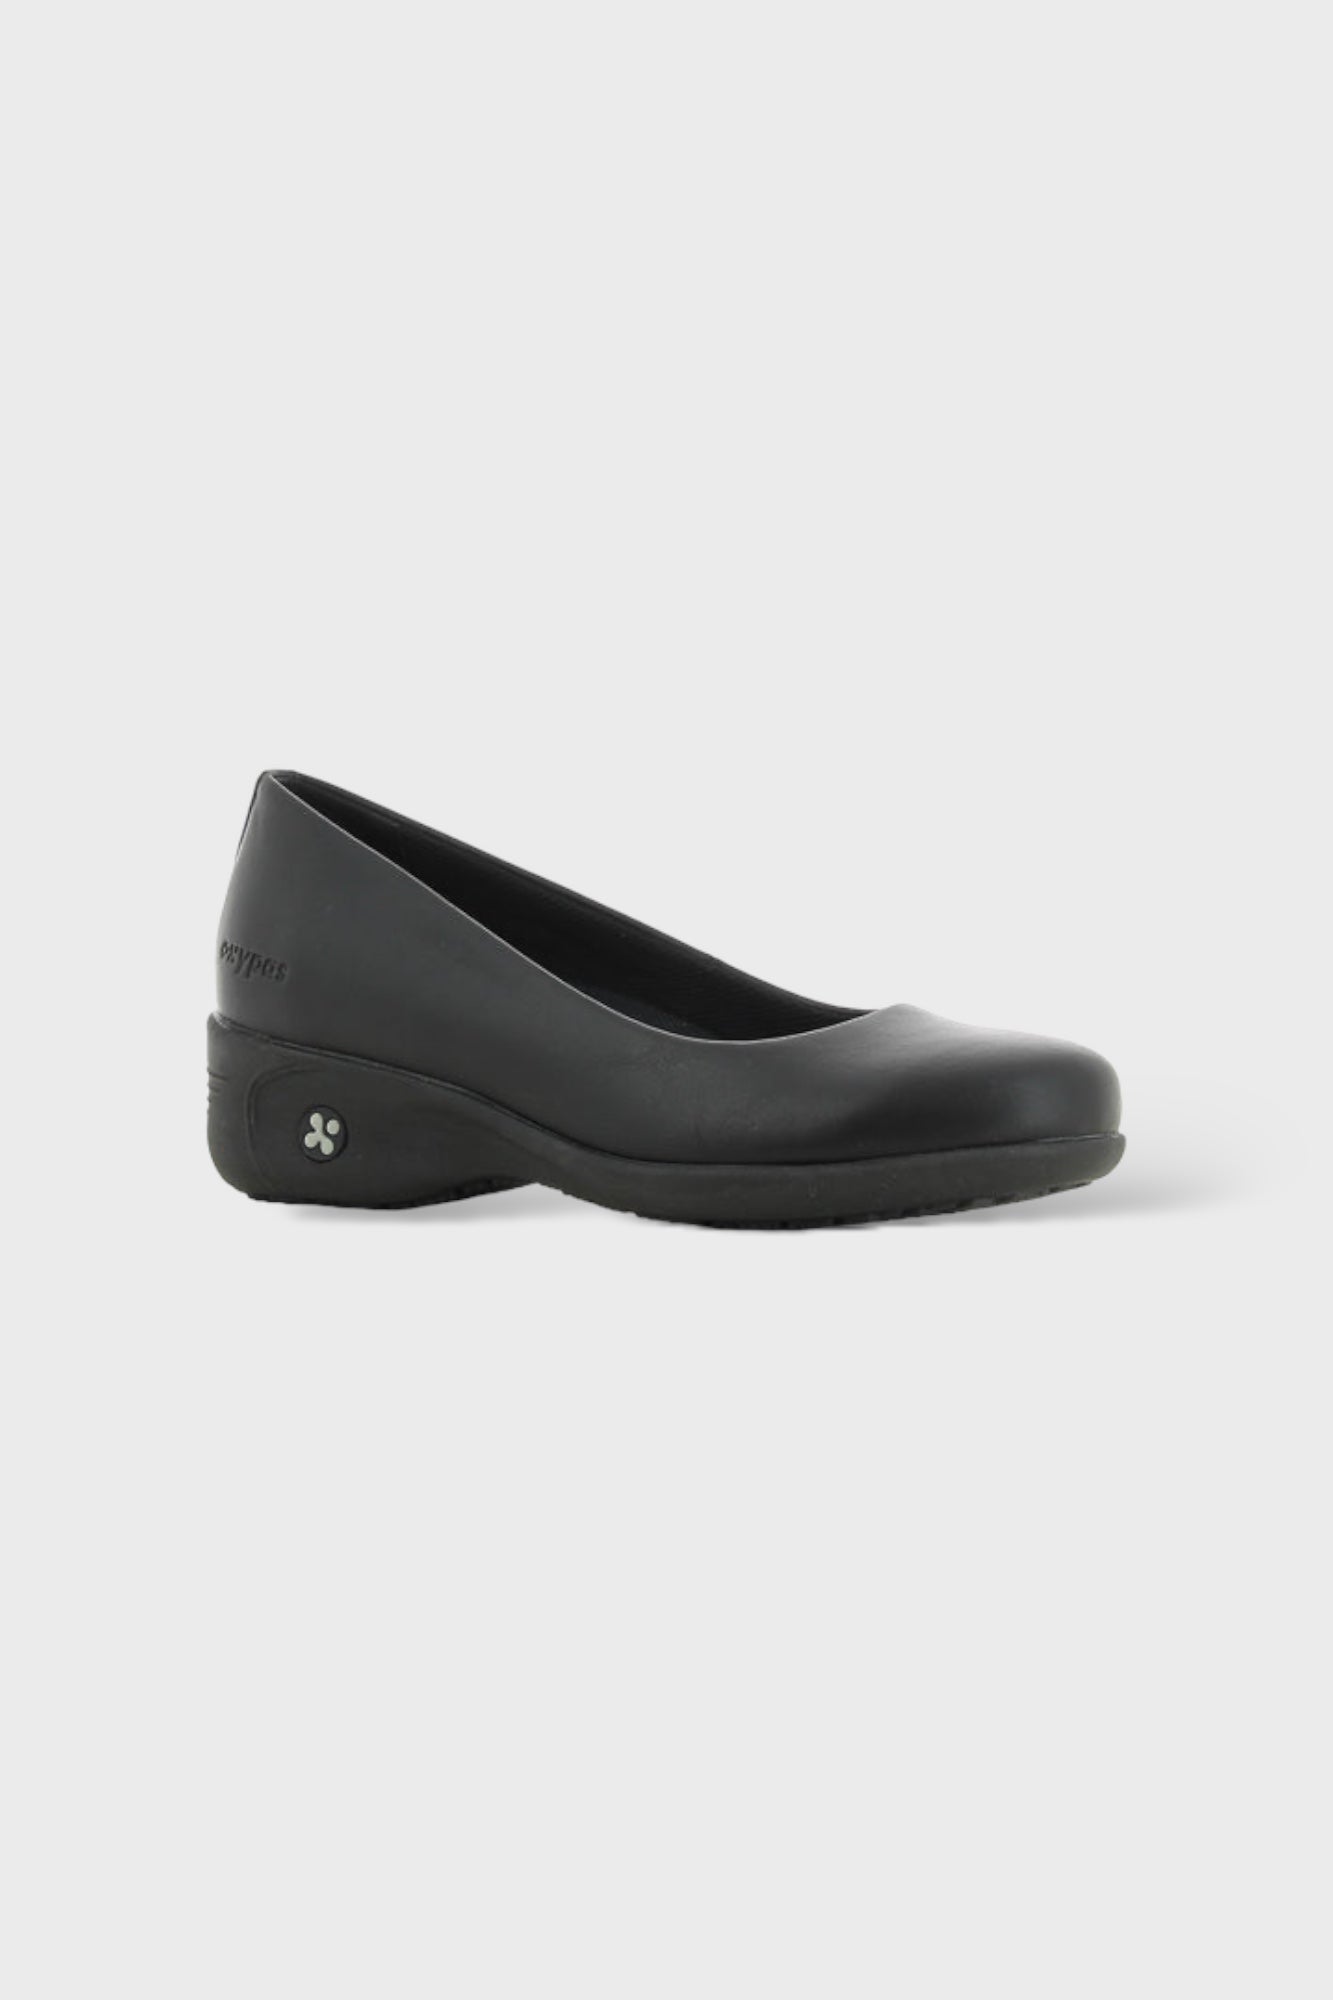 COLETTE - Professional Shoe with Heel